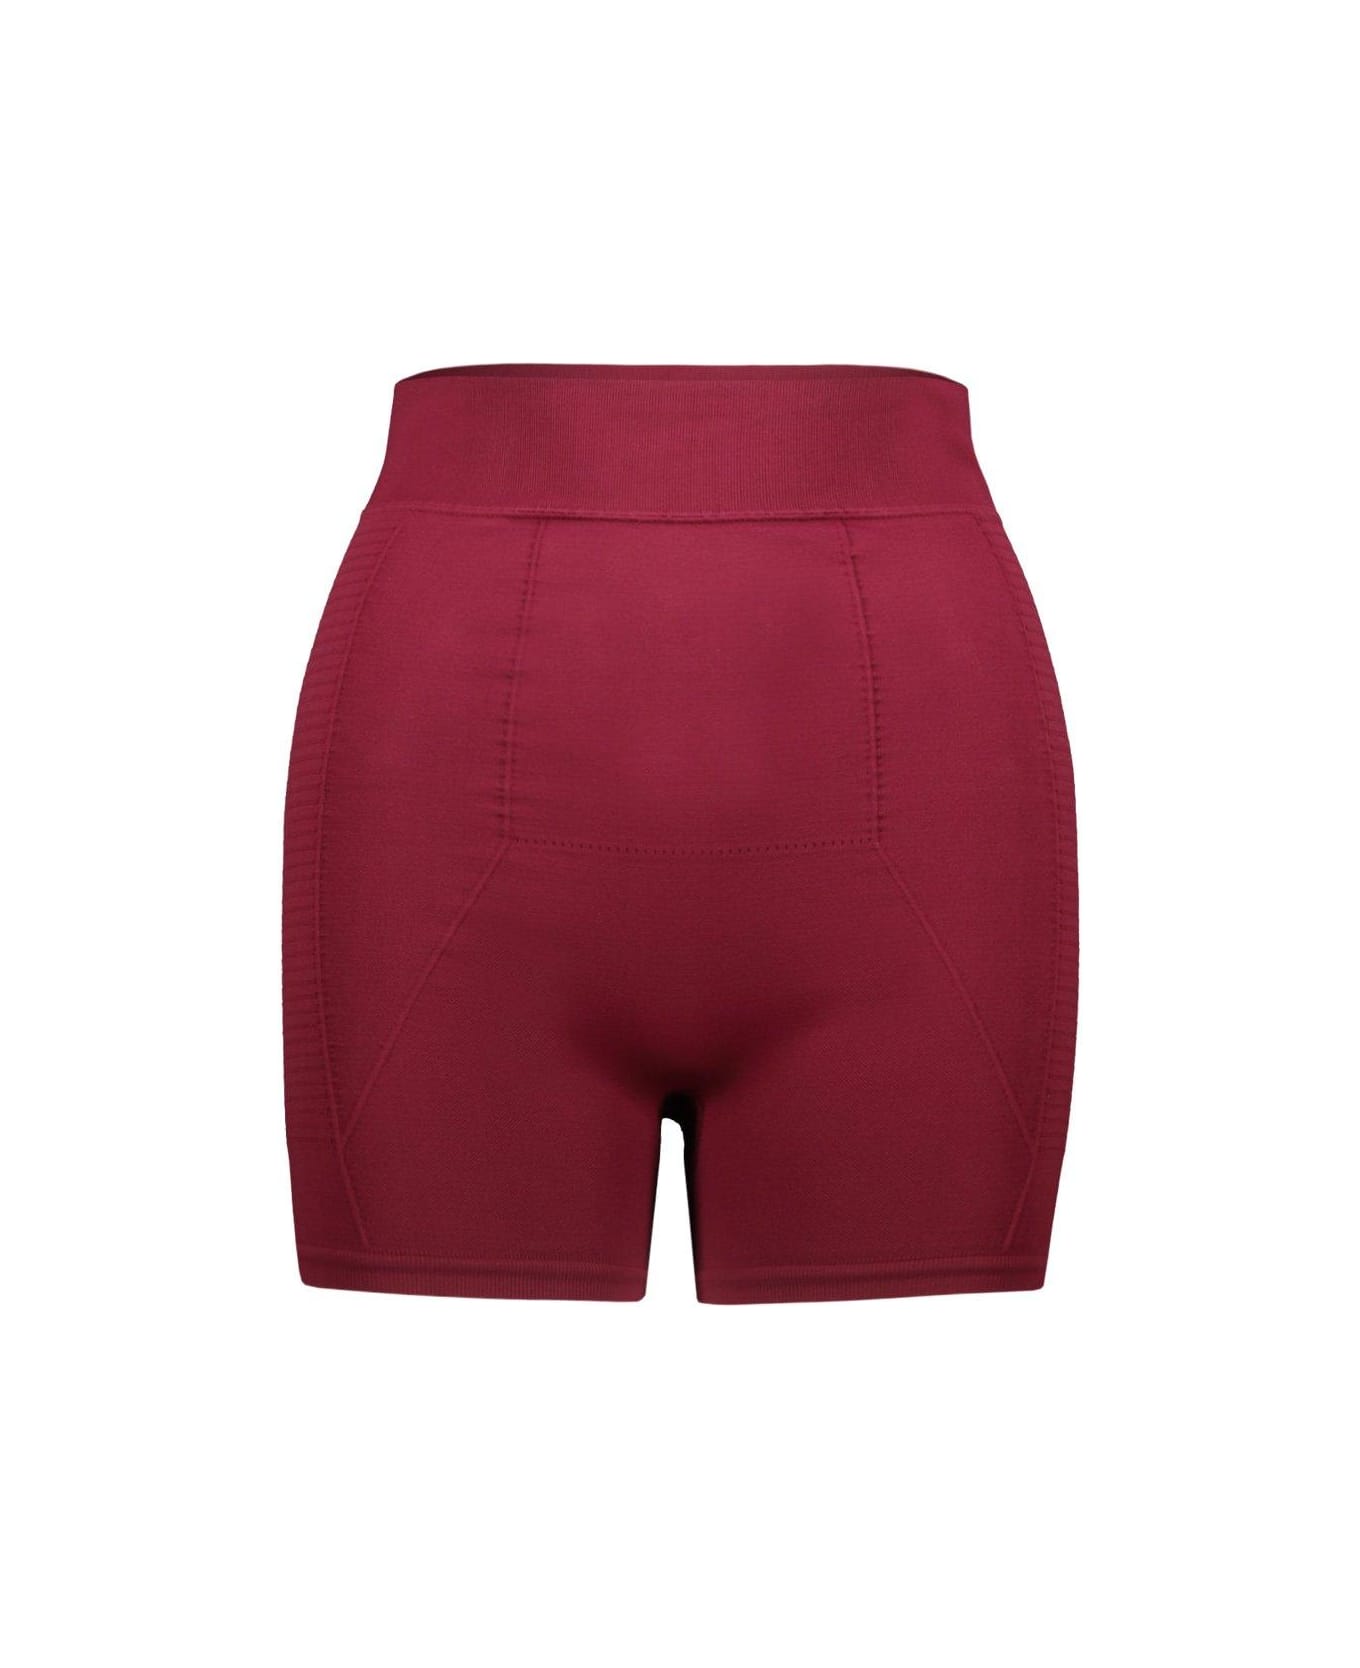 Rick Owens Stretch Ribbed Fitted Briefs - Fuchsia ショートパンツ